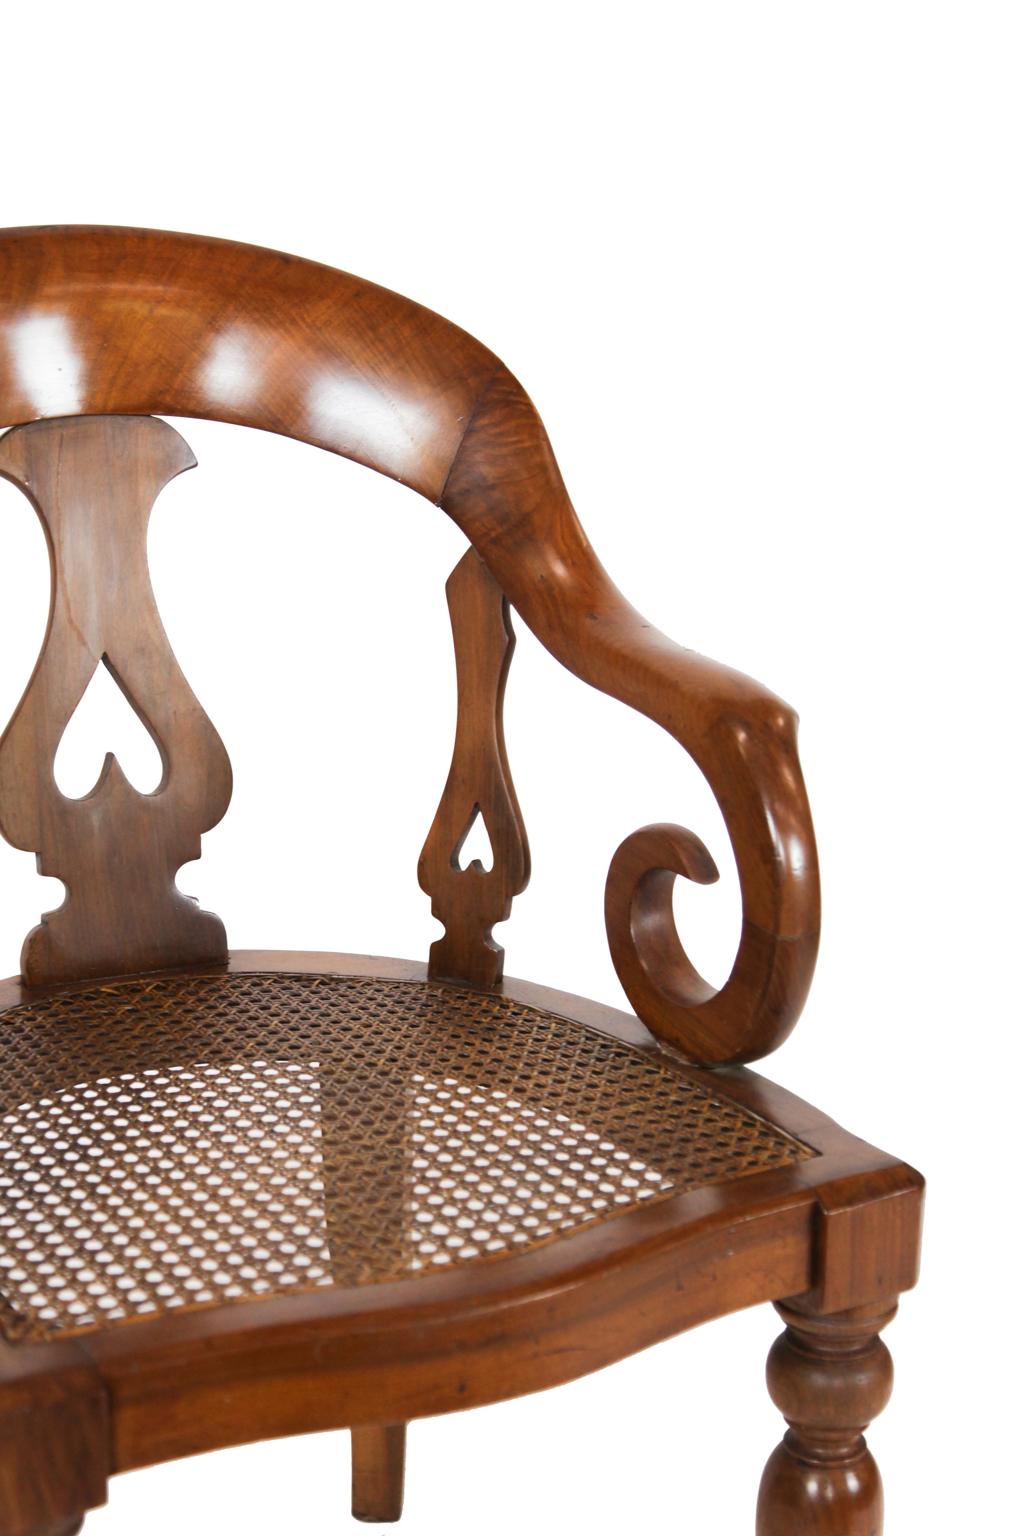 Caning Walnut Cane Seat Desk Chair